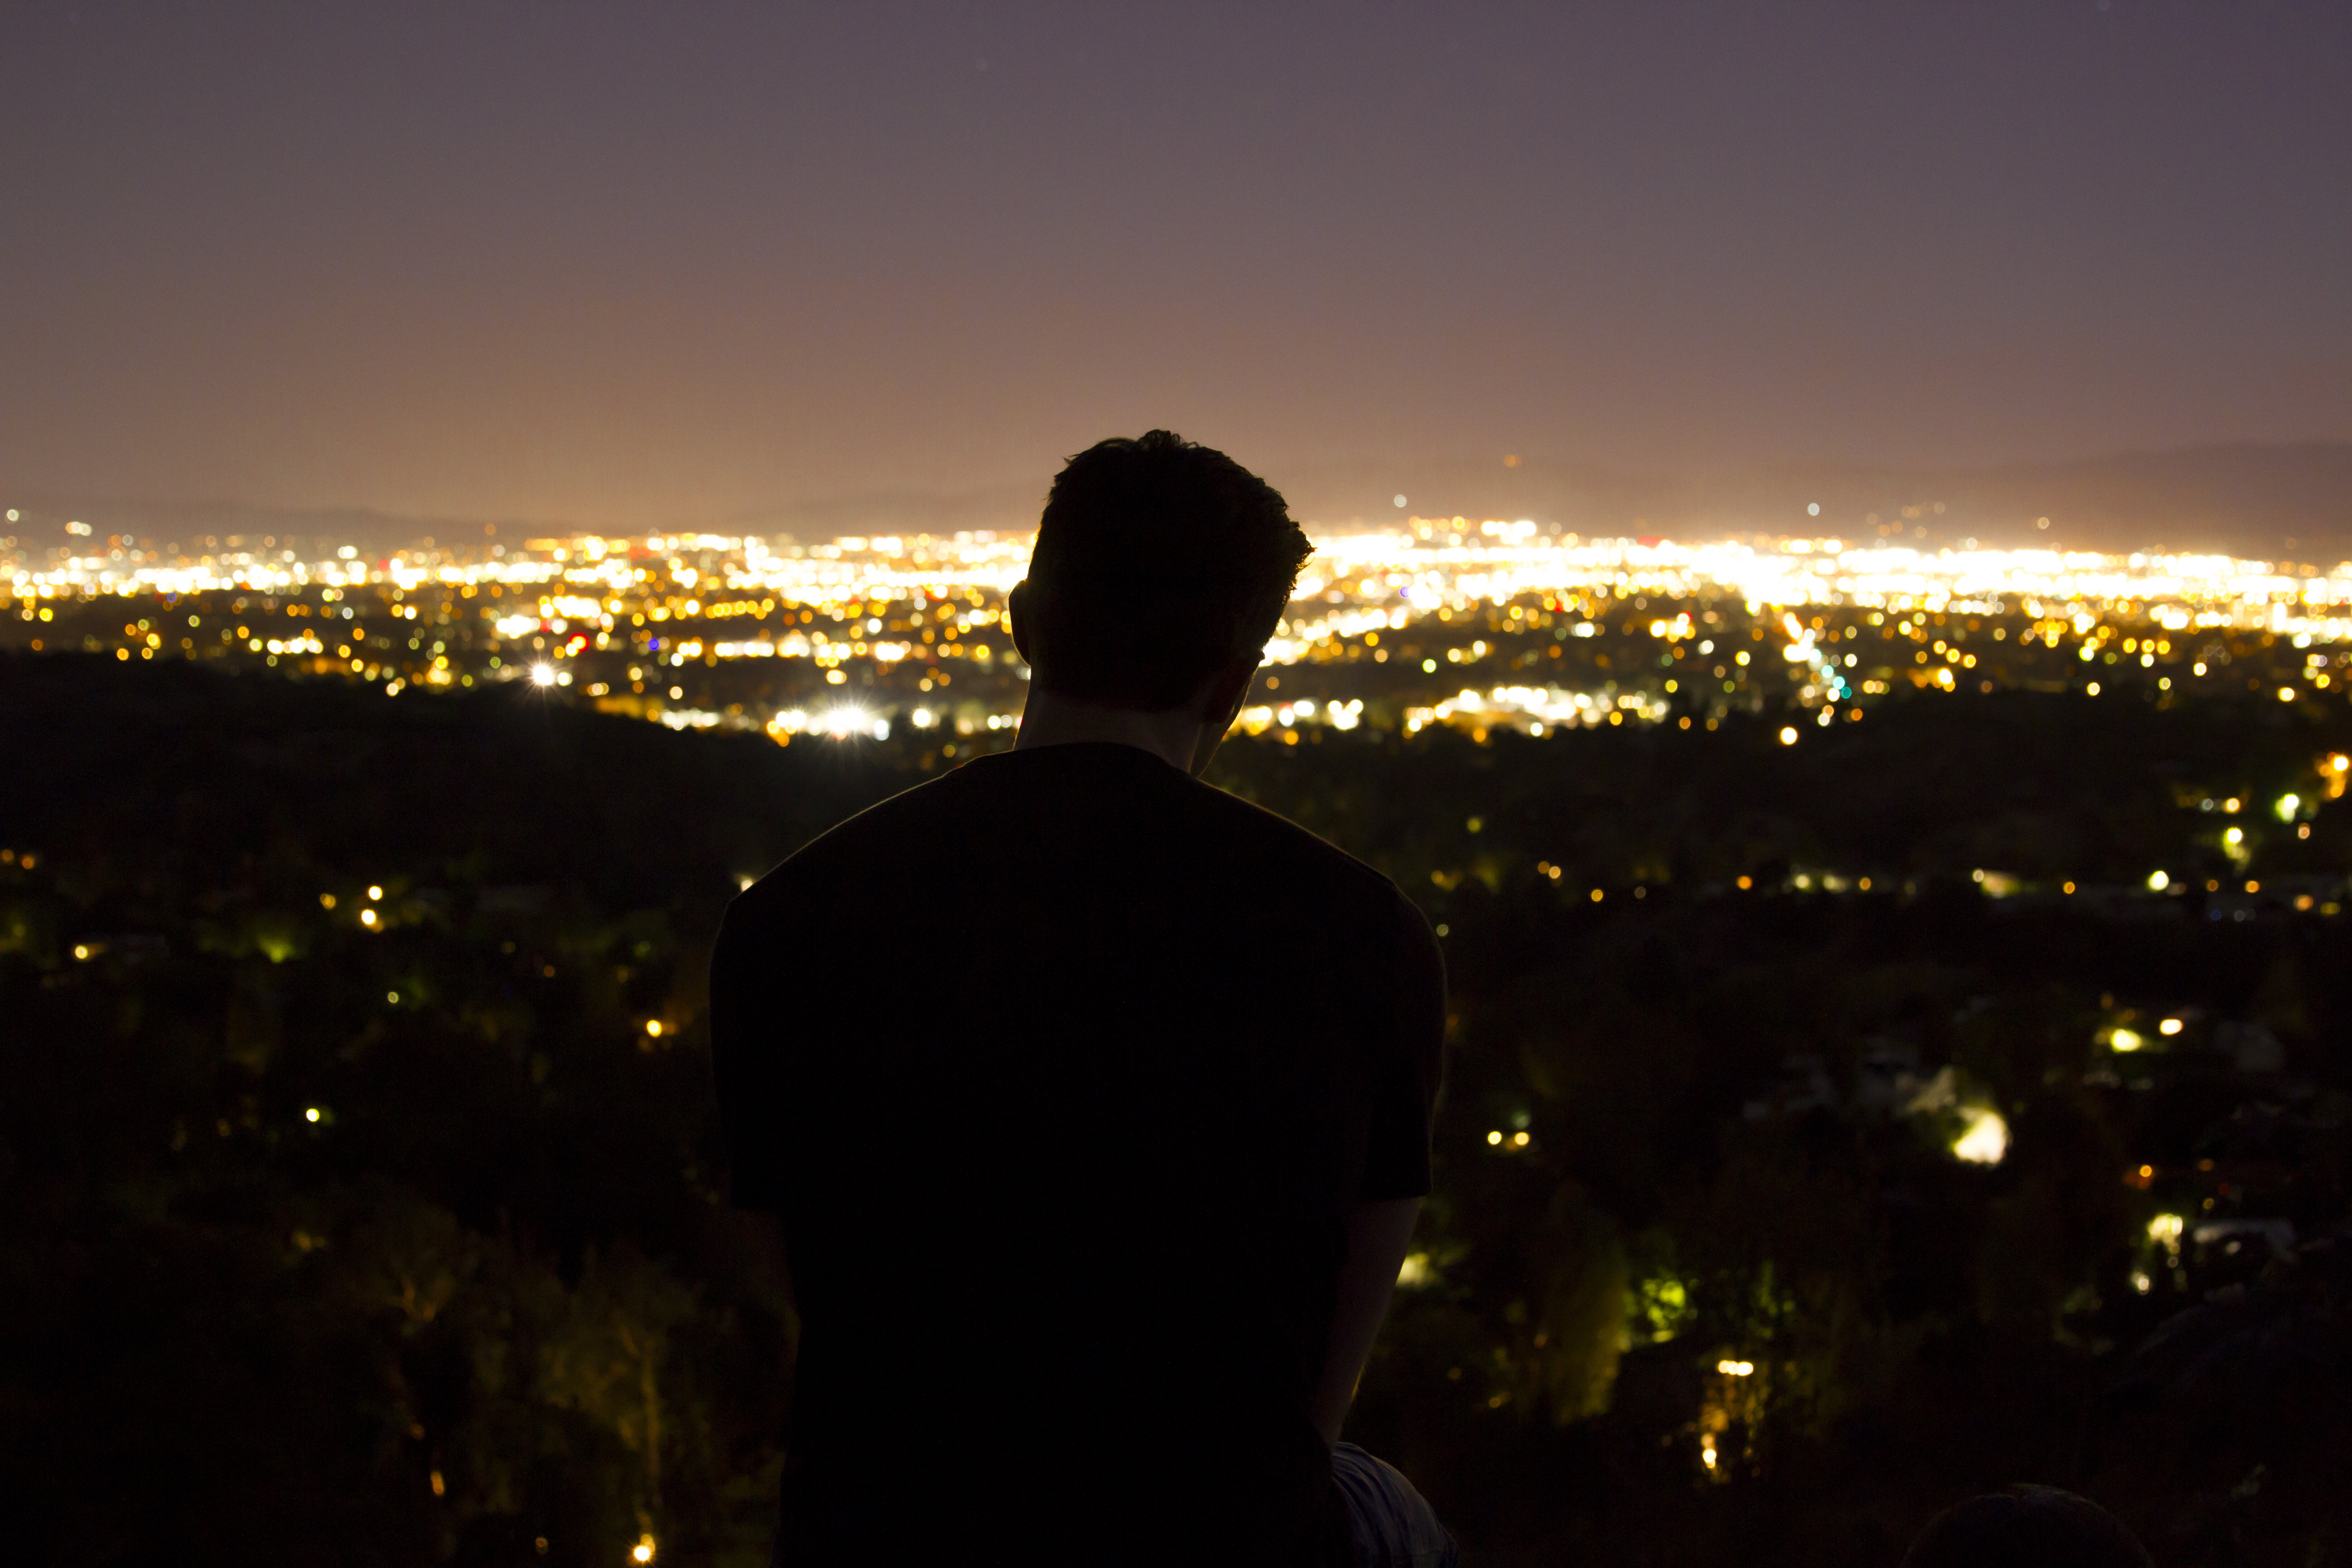 A production still from There I Go, overlooking Los Angeles